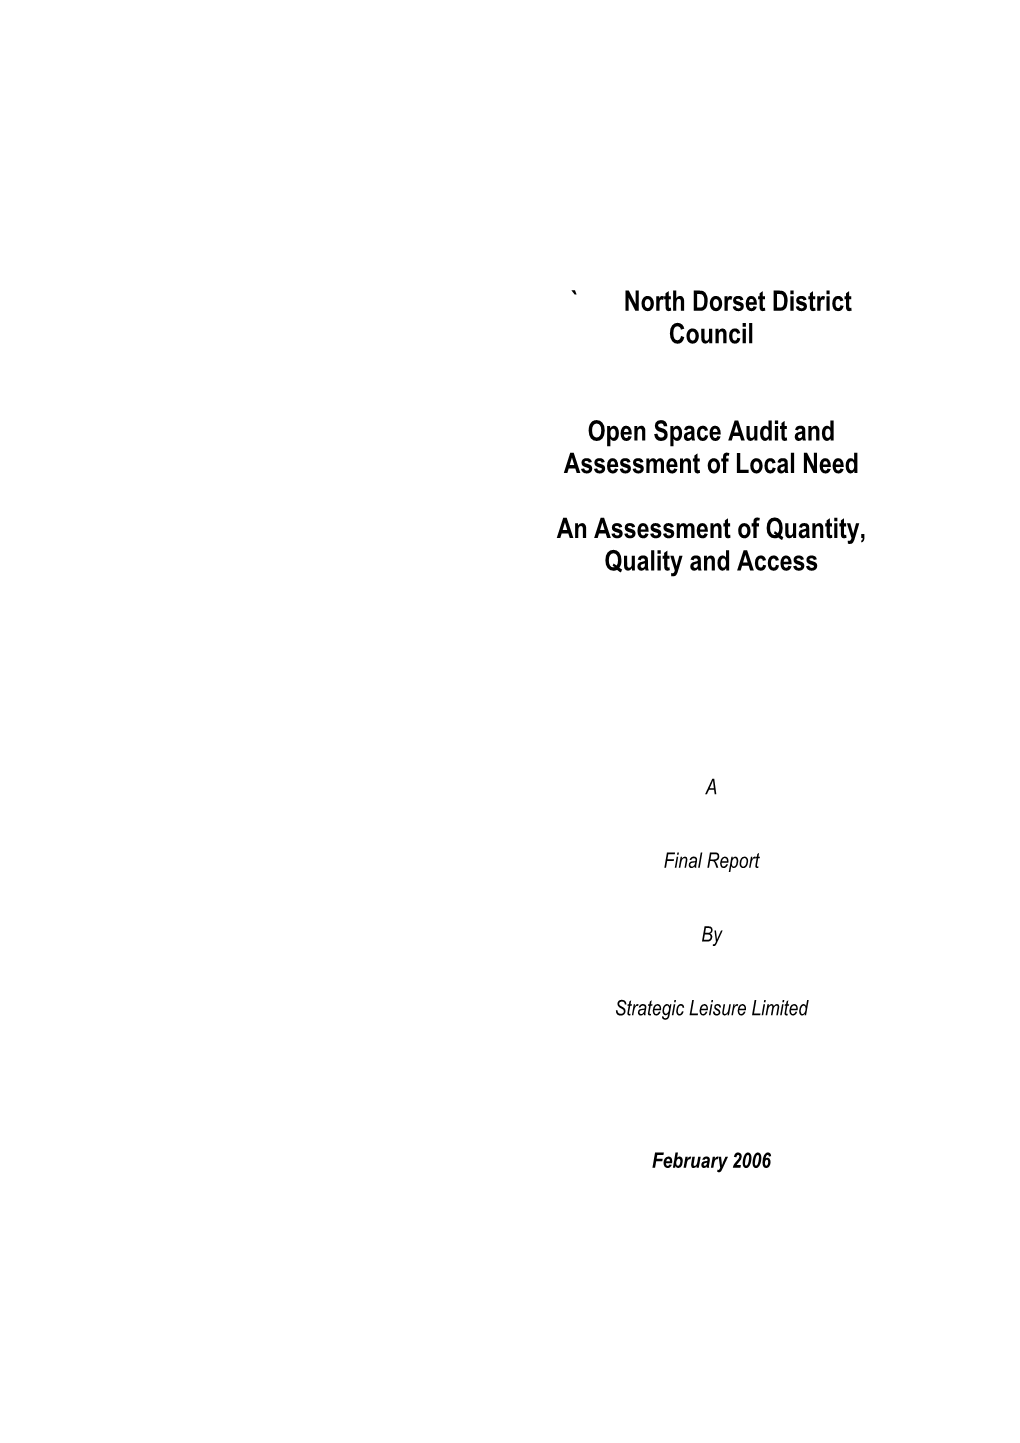 ` North Dorset District Council Open Space Audit and Assessment Of